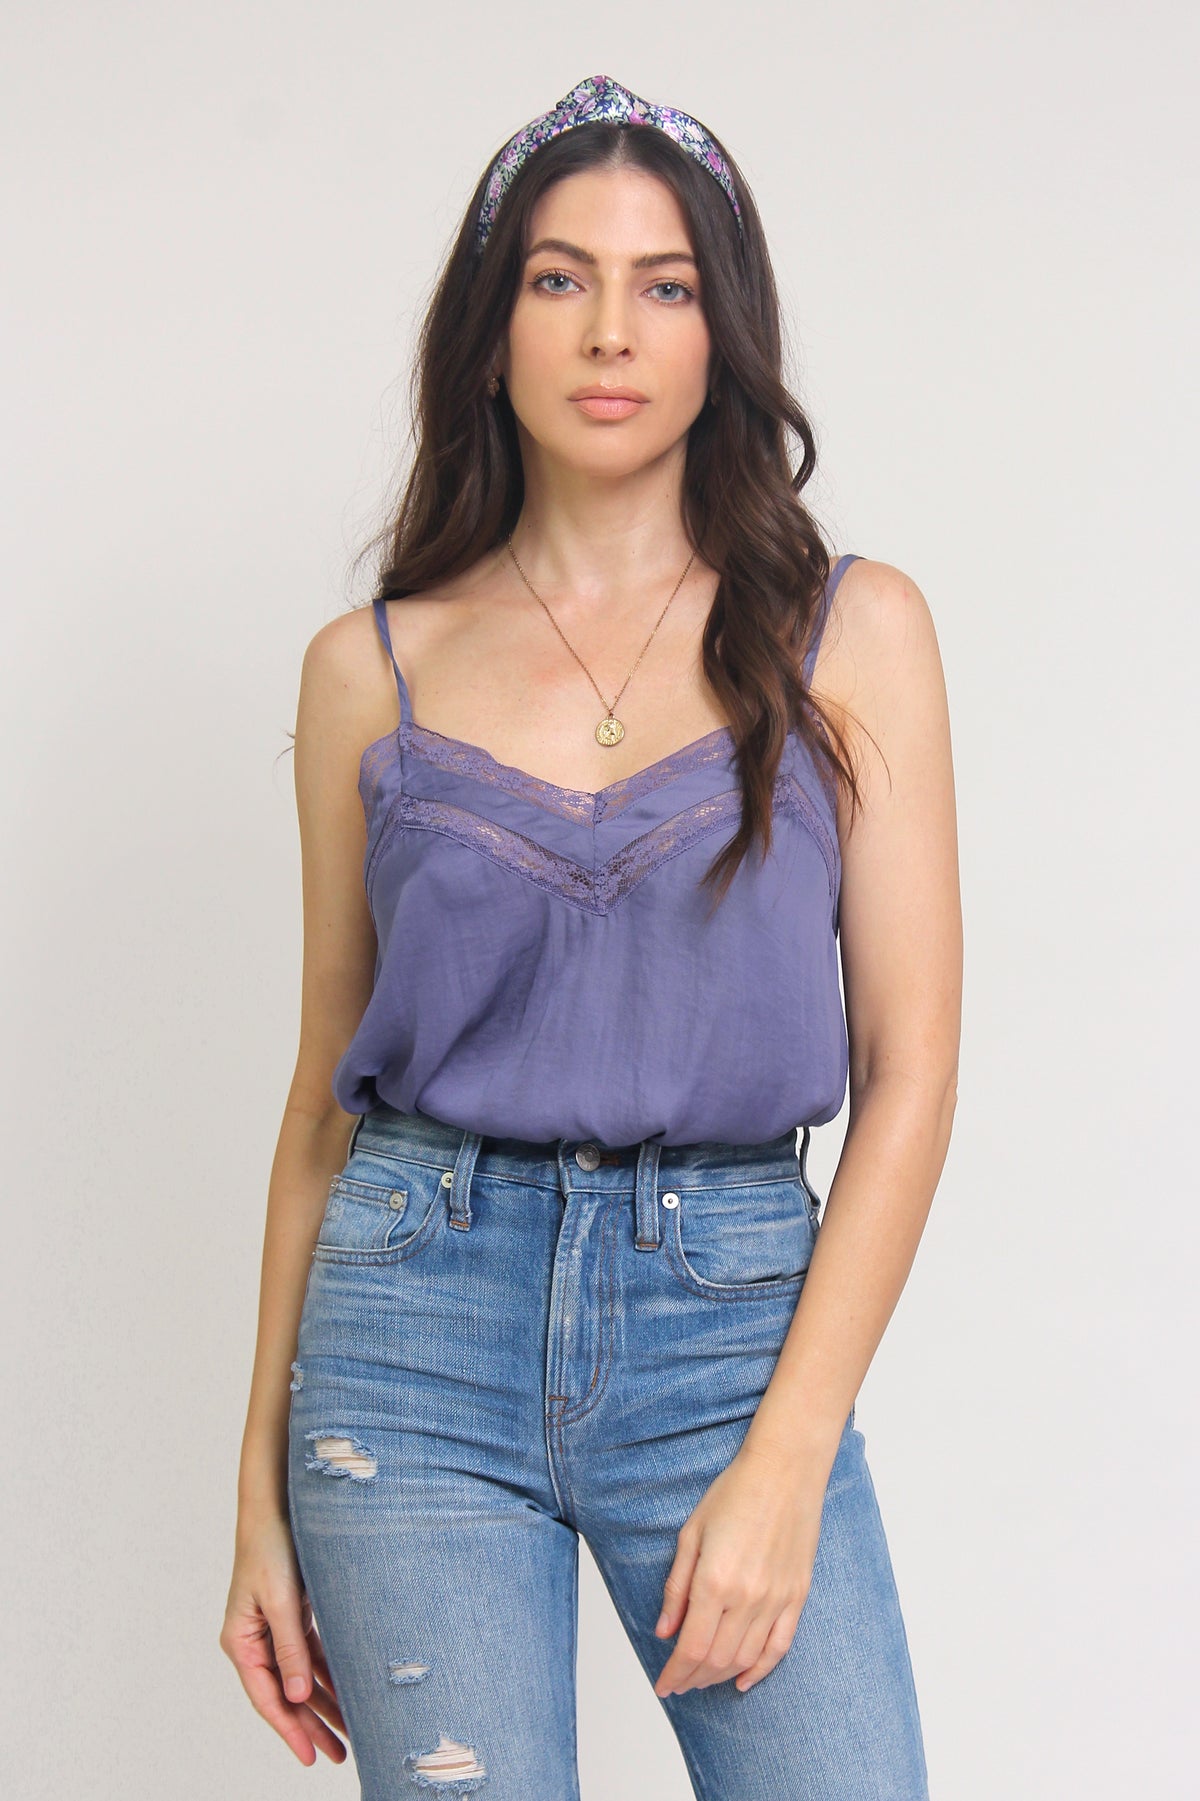 Bust Shaped Floral Camisole Crop Top - Aesthetic Shop